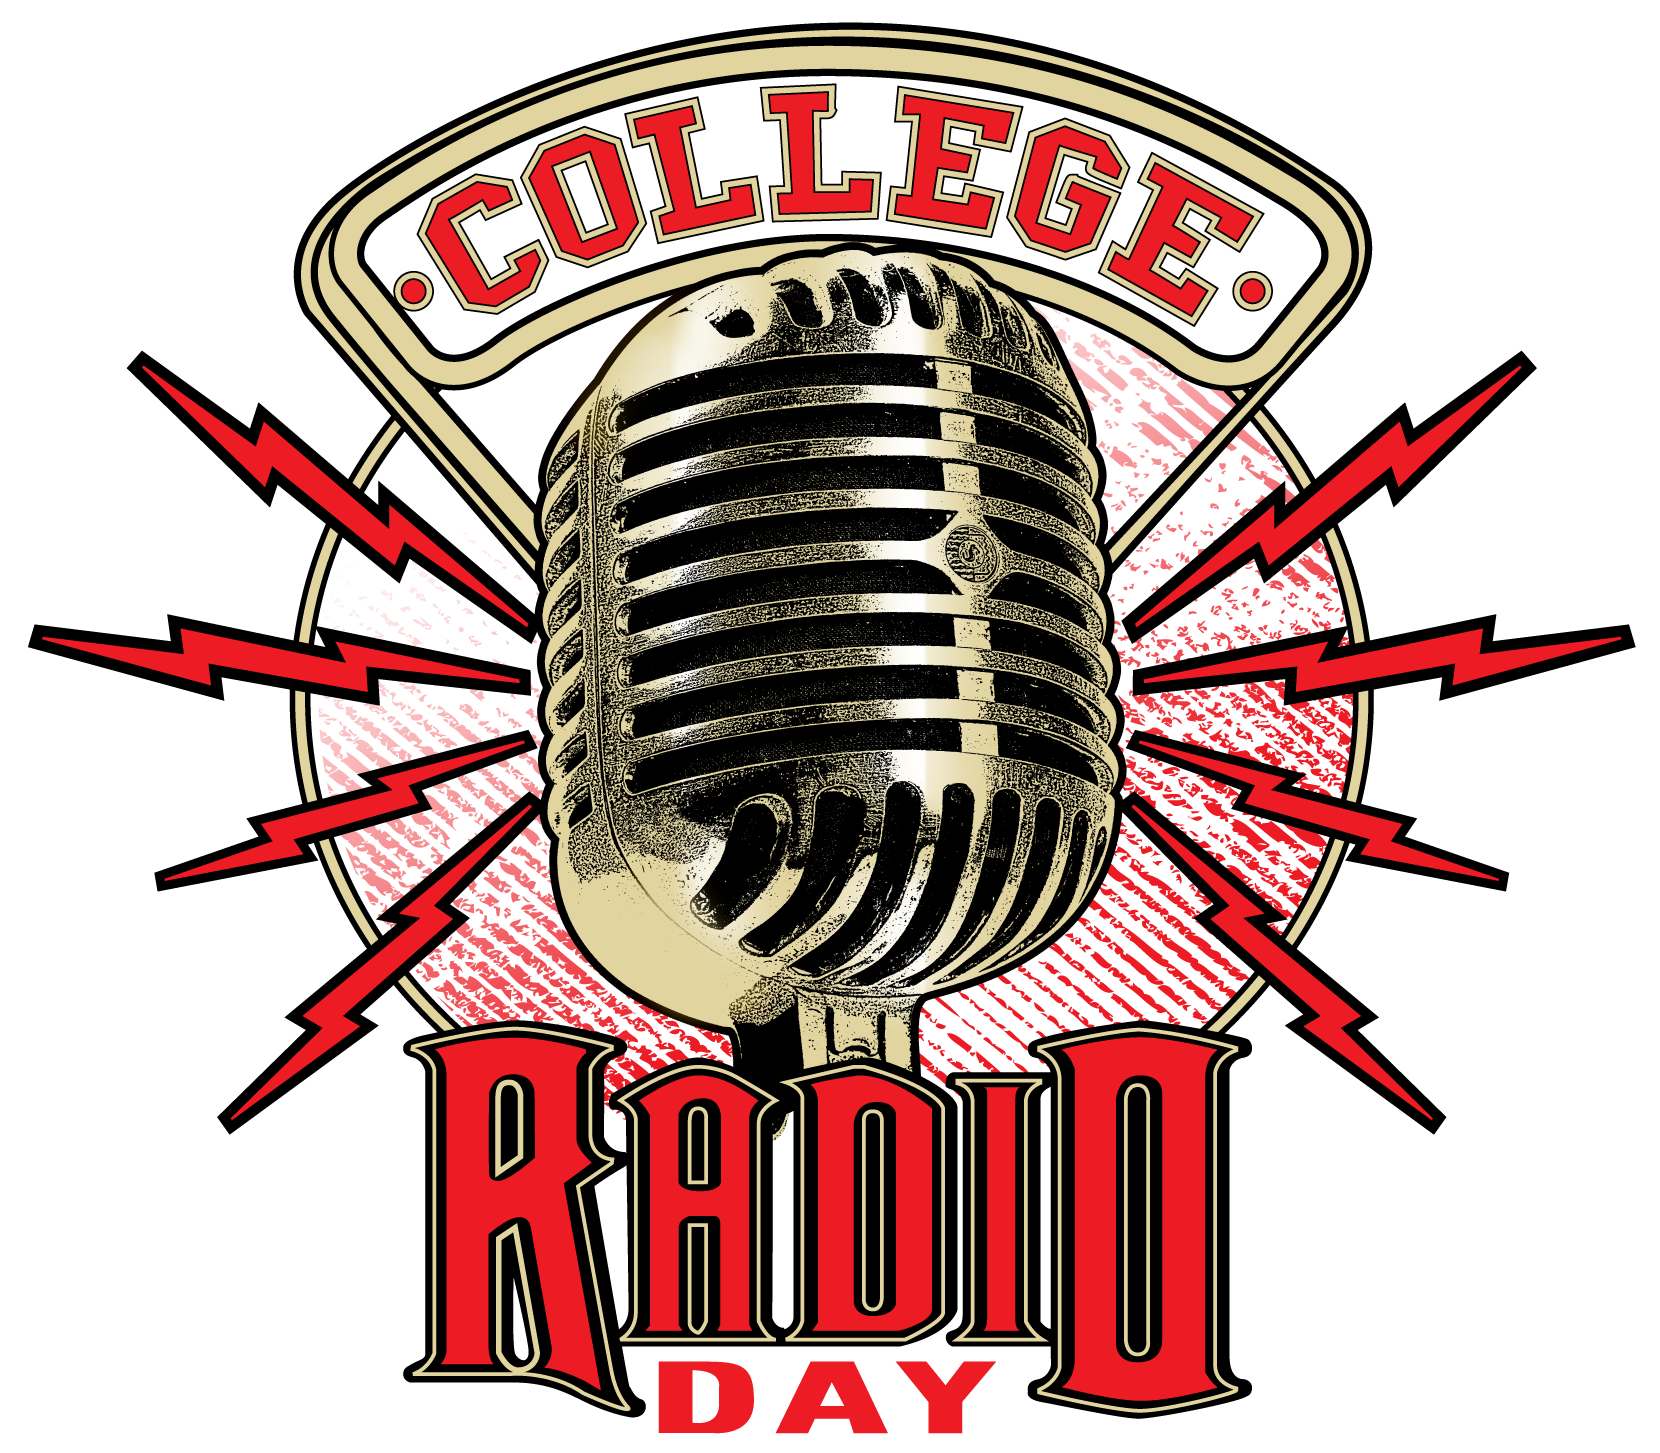 Register now for College Radio Day 2022!